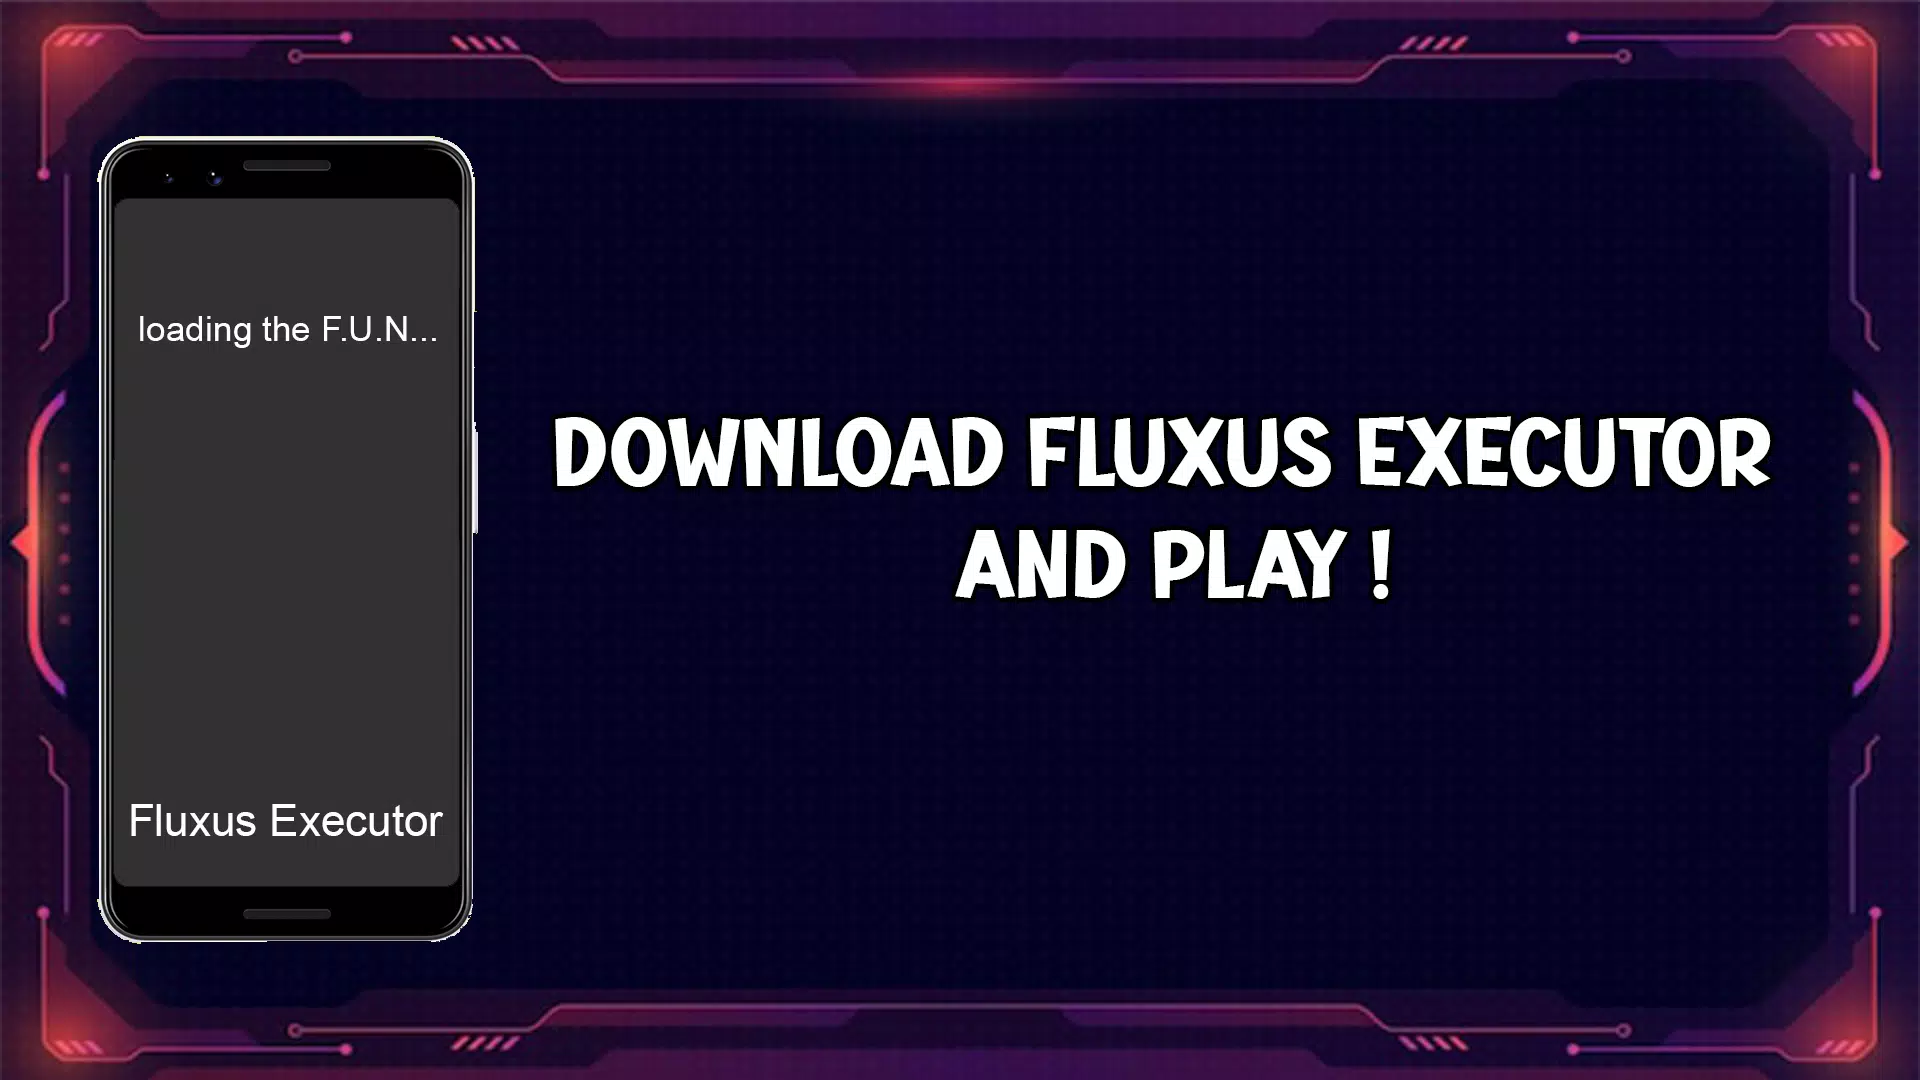 Fluxus Executor v7 APK Download For Android Mobile - 𝐂𝐏𝐔𝐓𝐞𝐦𝐩𝐞𝐫